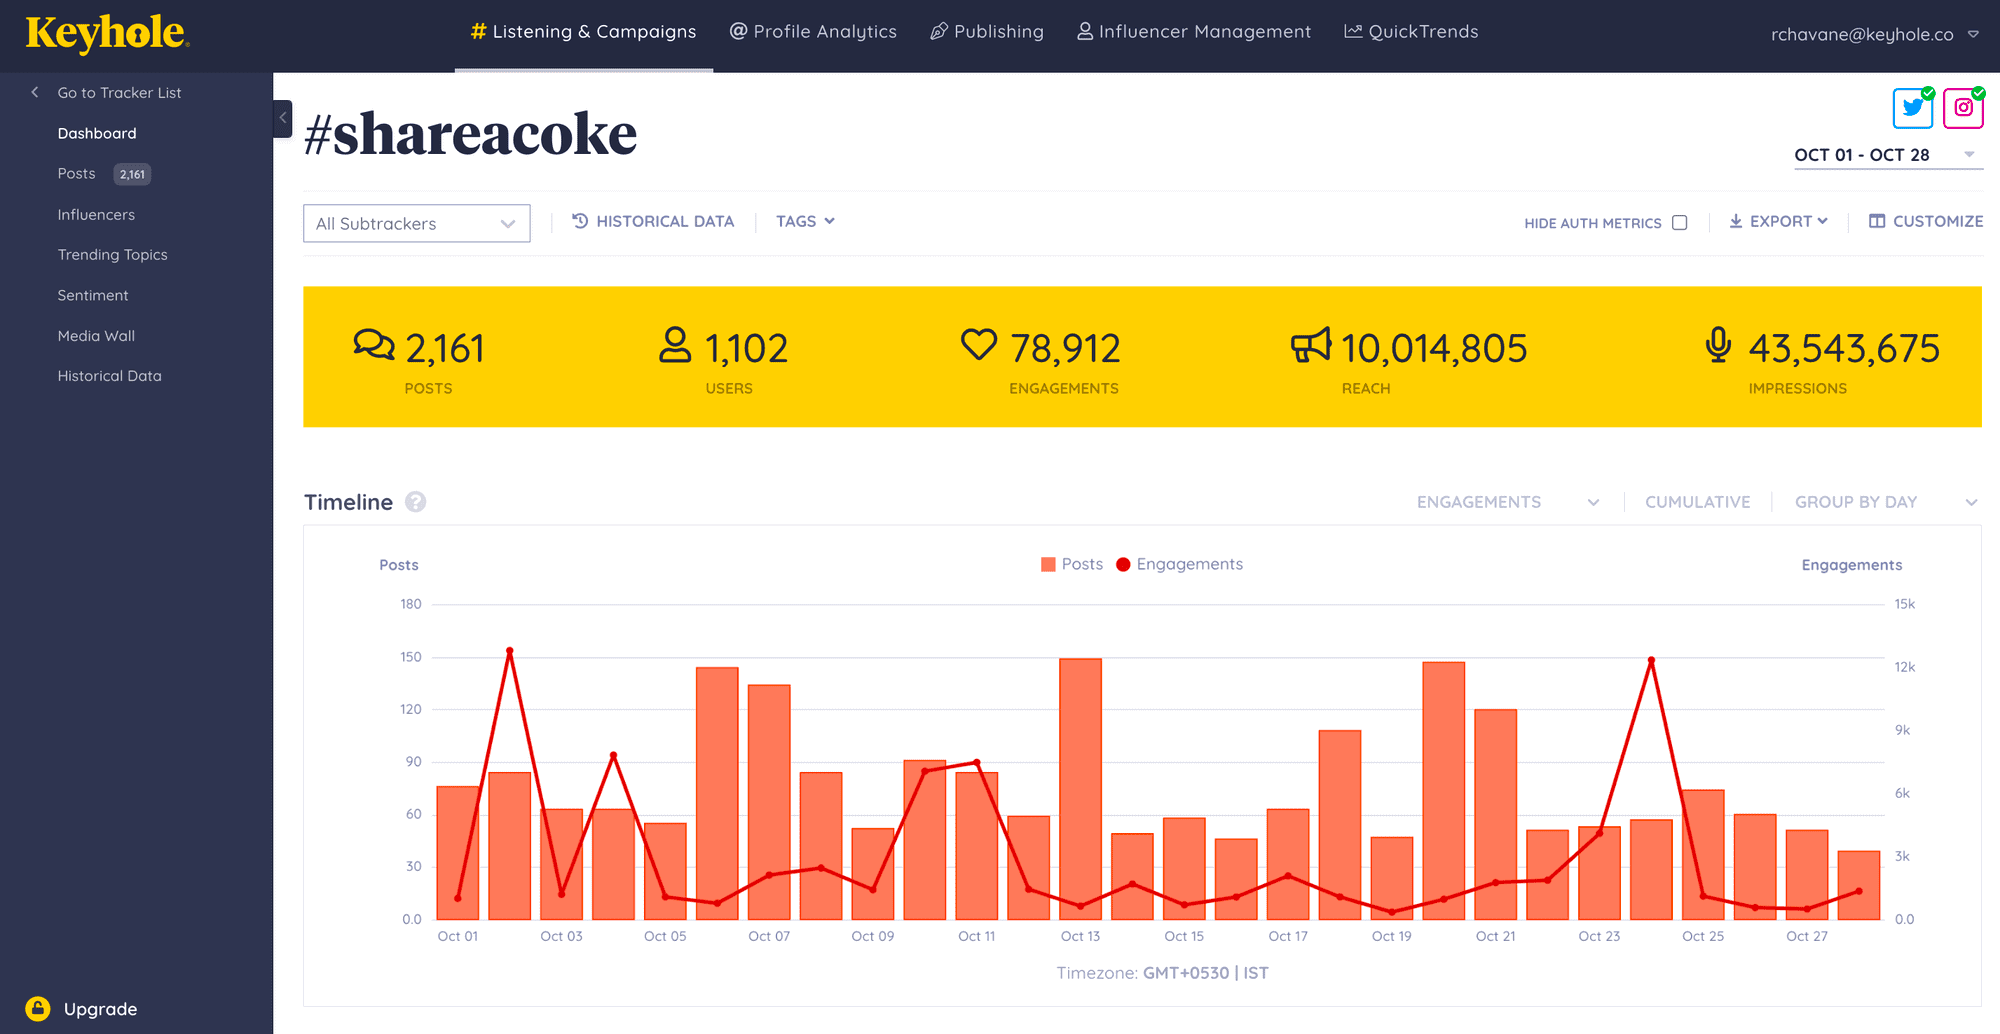 Keyhole dashboard interface displaying real-time hashtag tracking and social media analytics.